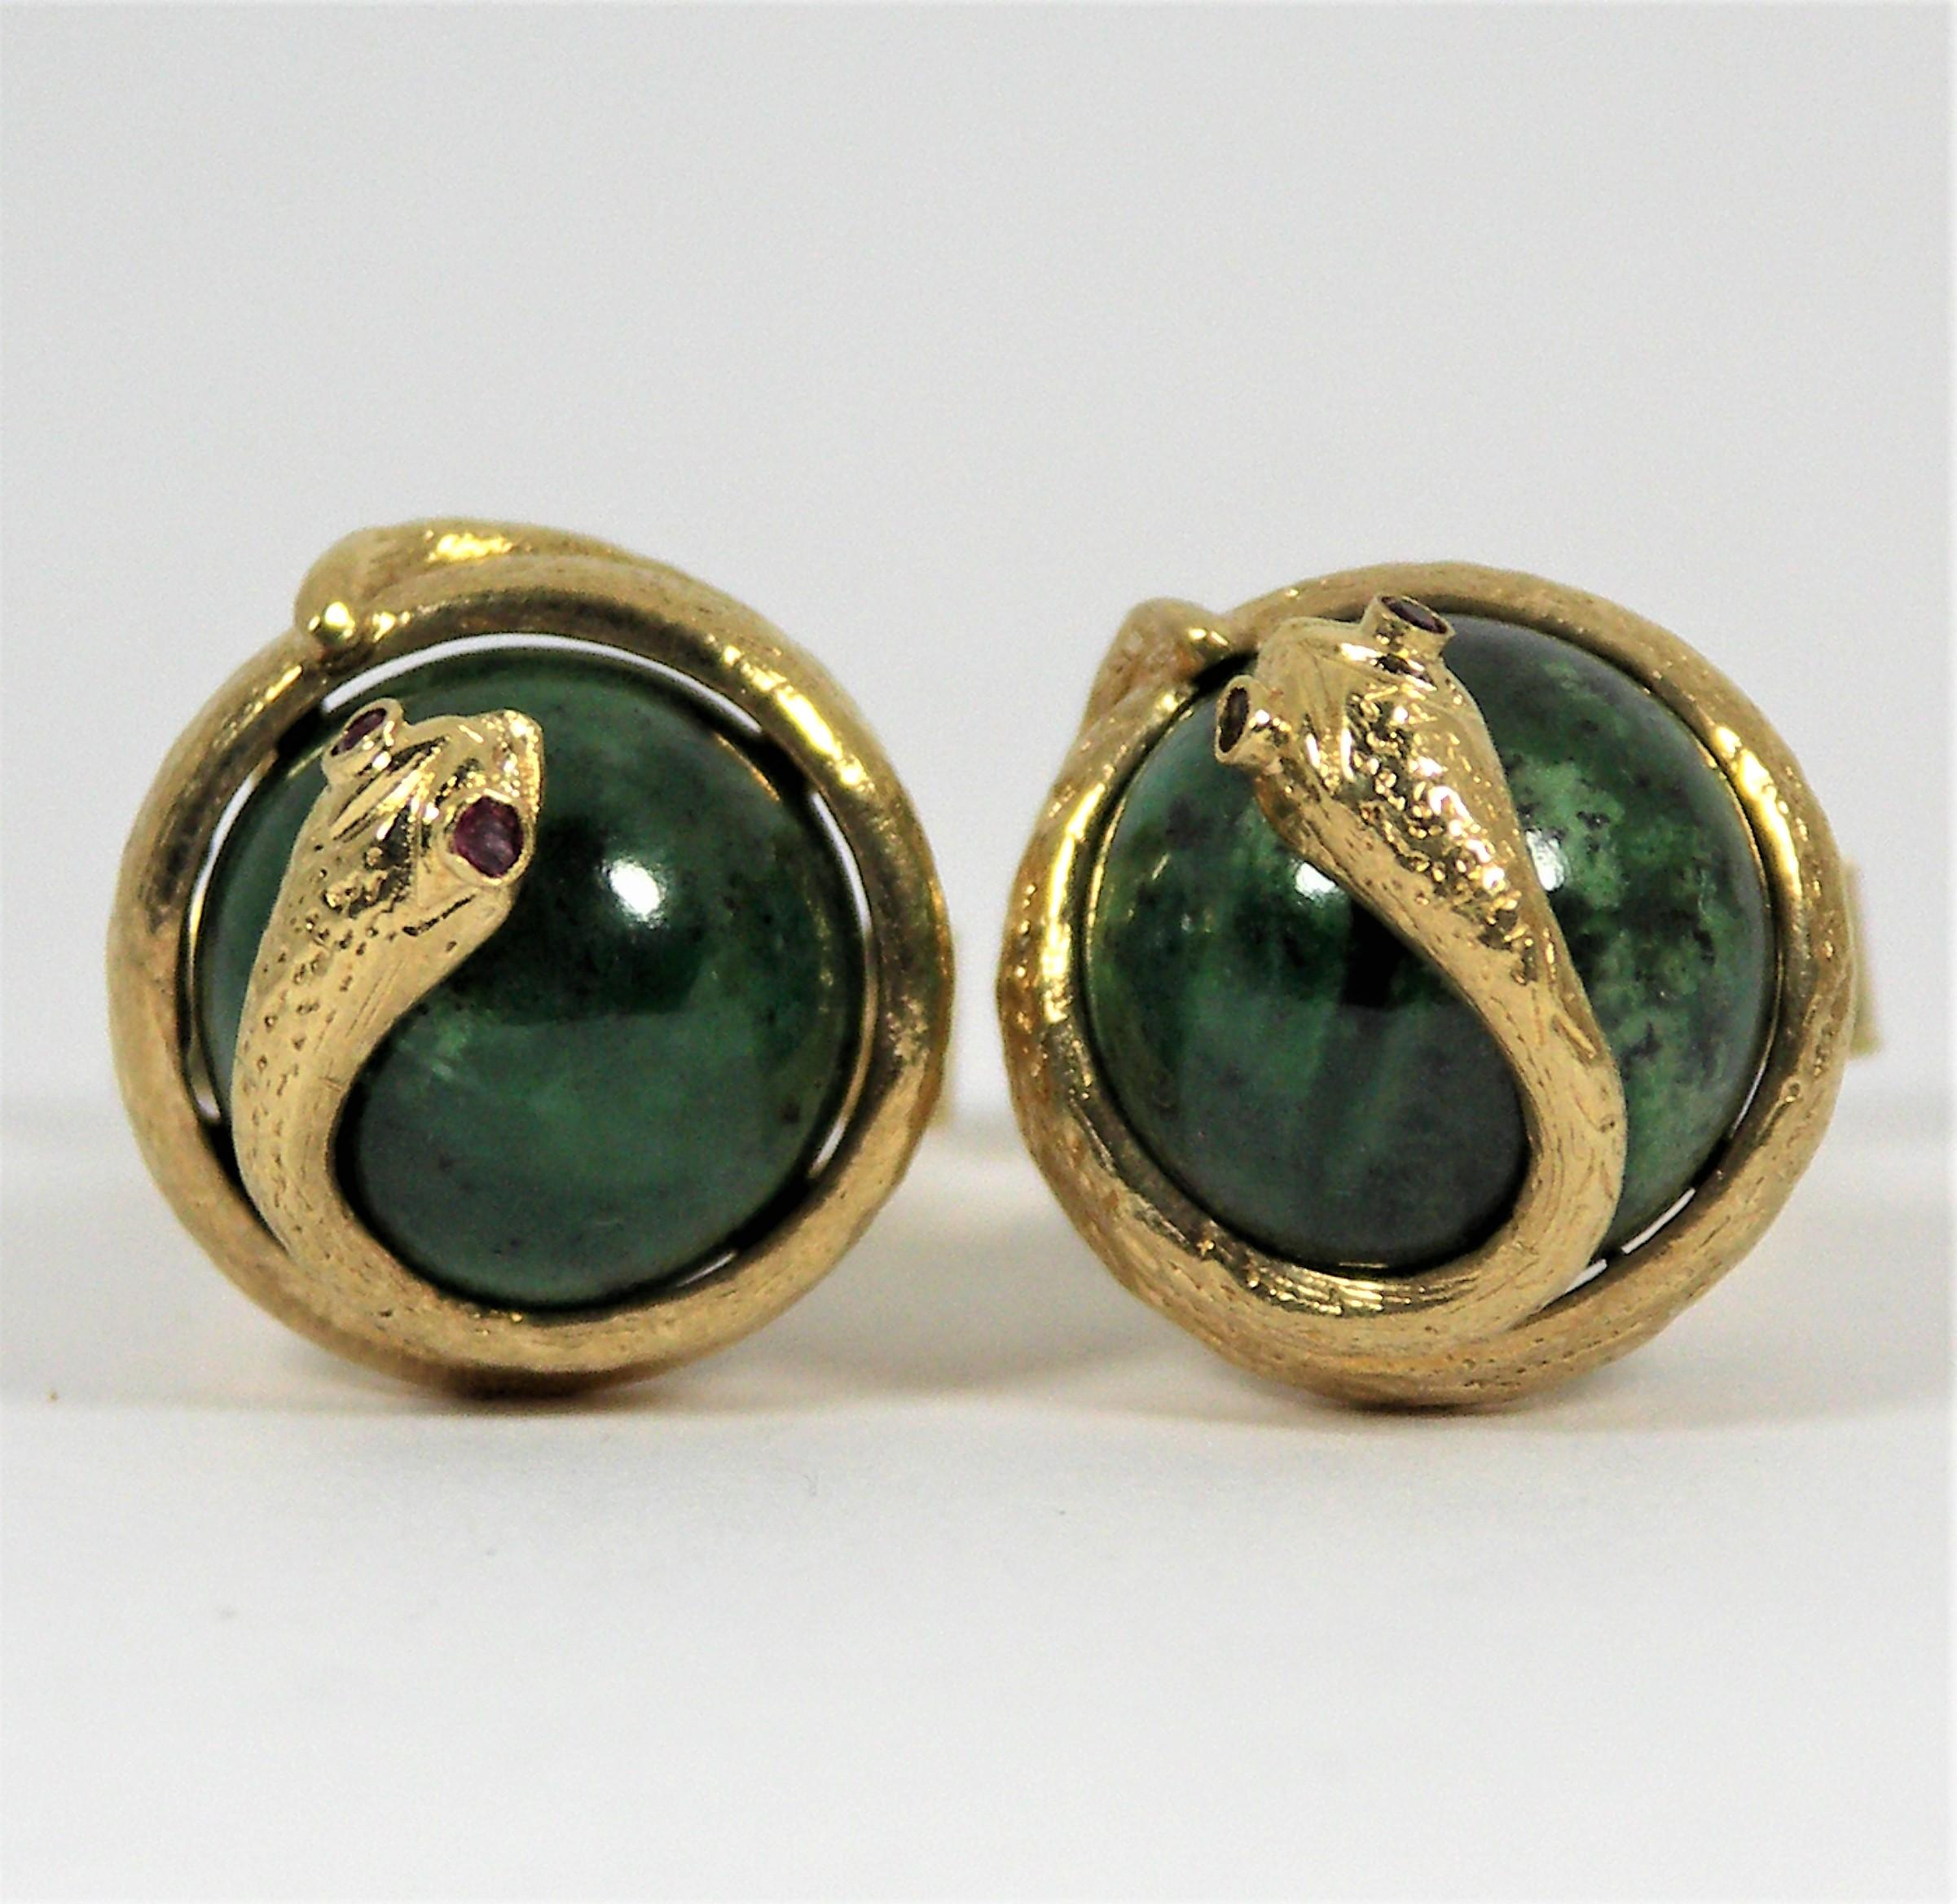 The two gold snakes are coiled around the Jade centers from head to tail, and are accented with ruby eyes. These unique cufflinks are made
of 14k Yellow Gold and have flip, toggle backs. They measure 1 3/8 inch in overall length by just under 3/4